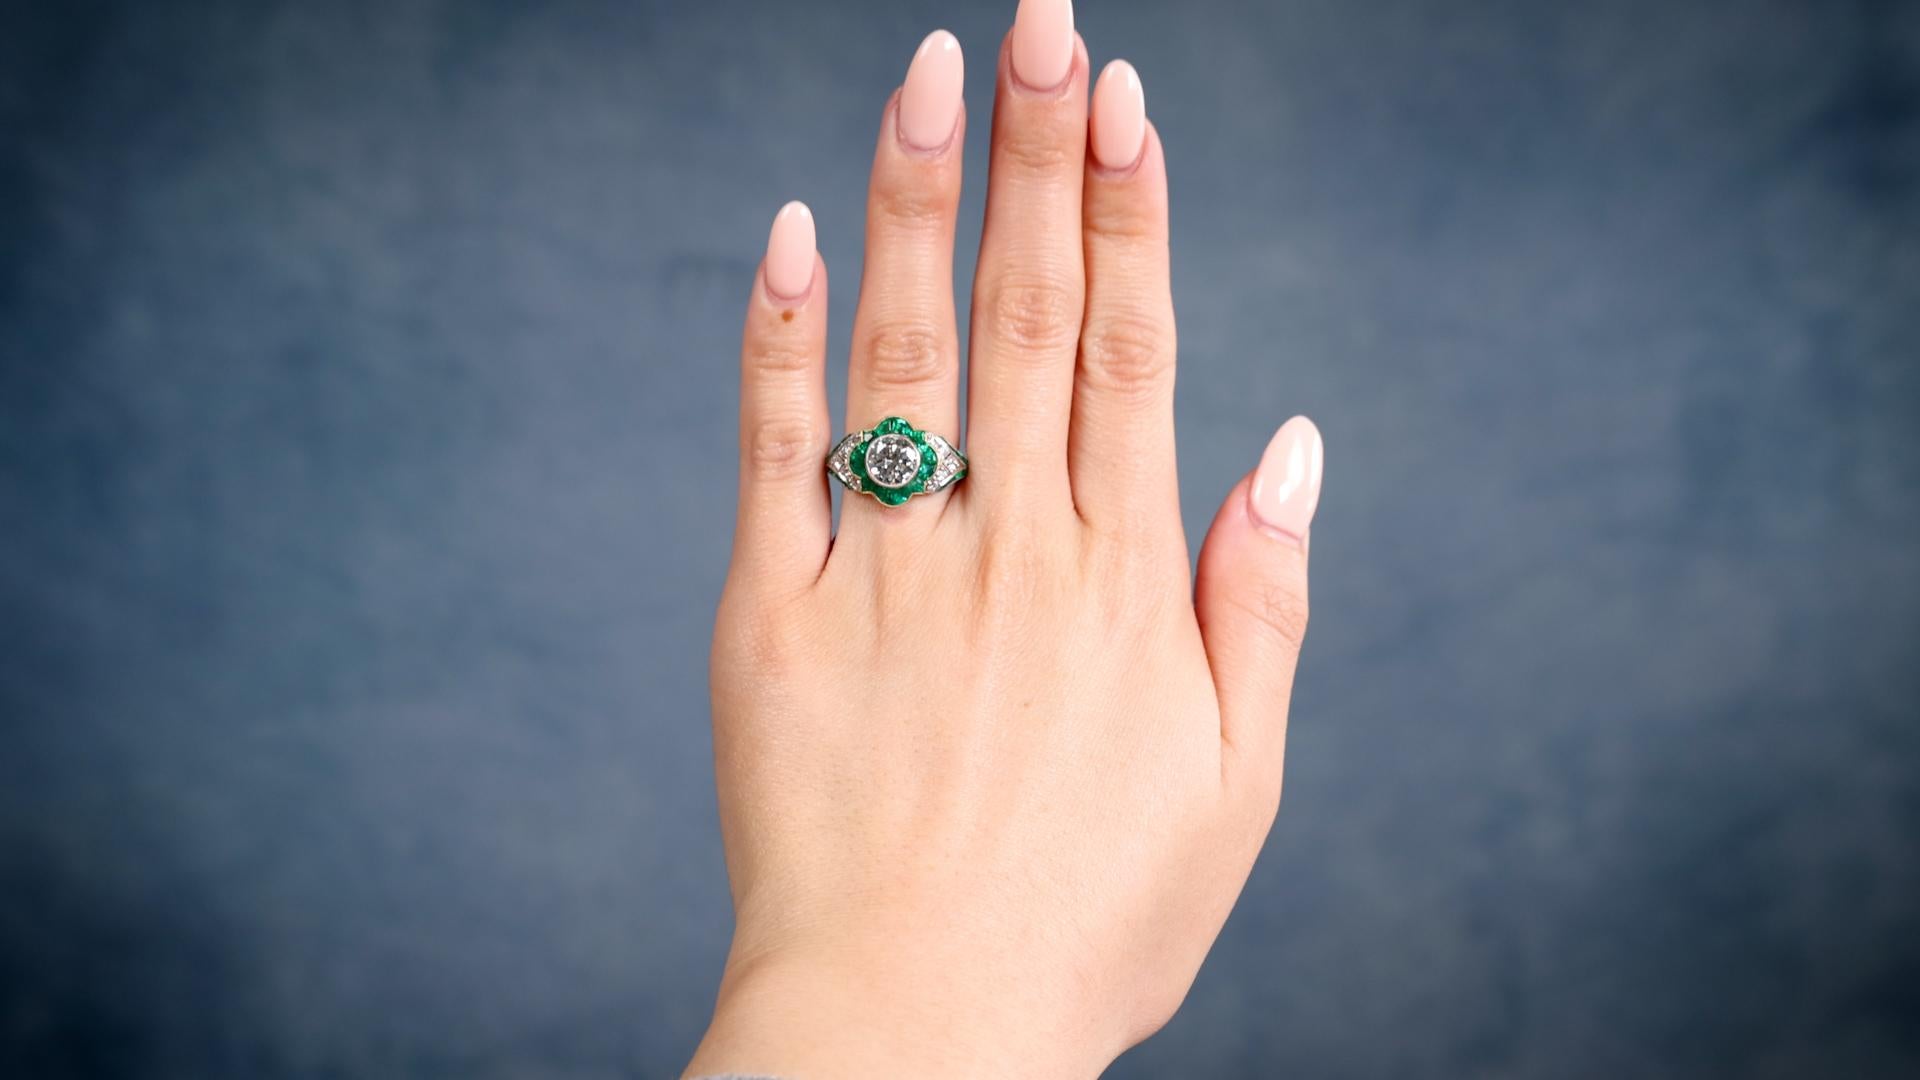 One Art Deco Inspired 1.32 Carat Transitional Cut Diamond Emerald Platinum Ring. Featuring one transitional cut diamond of 1.32 carats, graded I color VS2 clarity. Accented by 28 calibré cut emeralds with a total weight of approximately 1.40 carats,